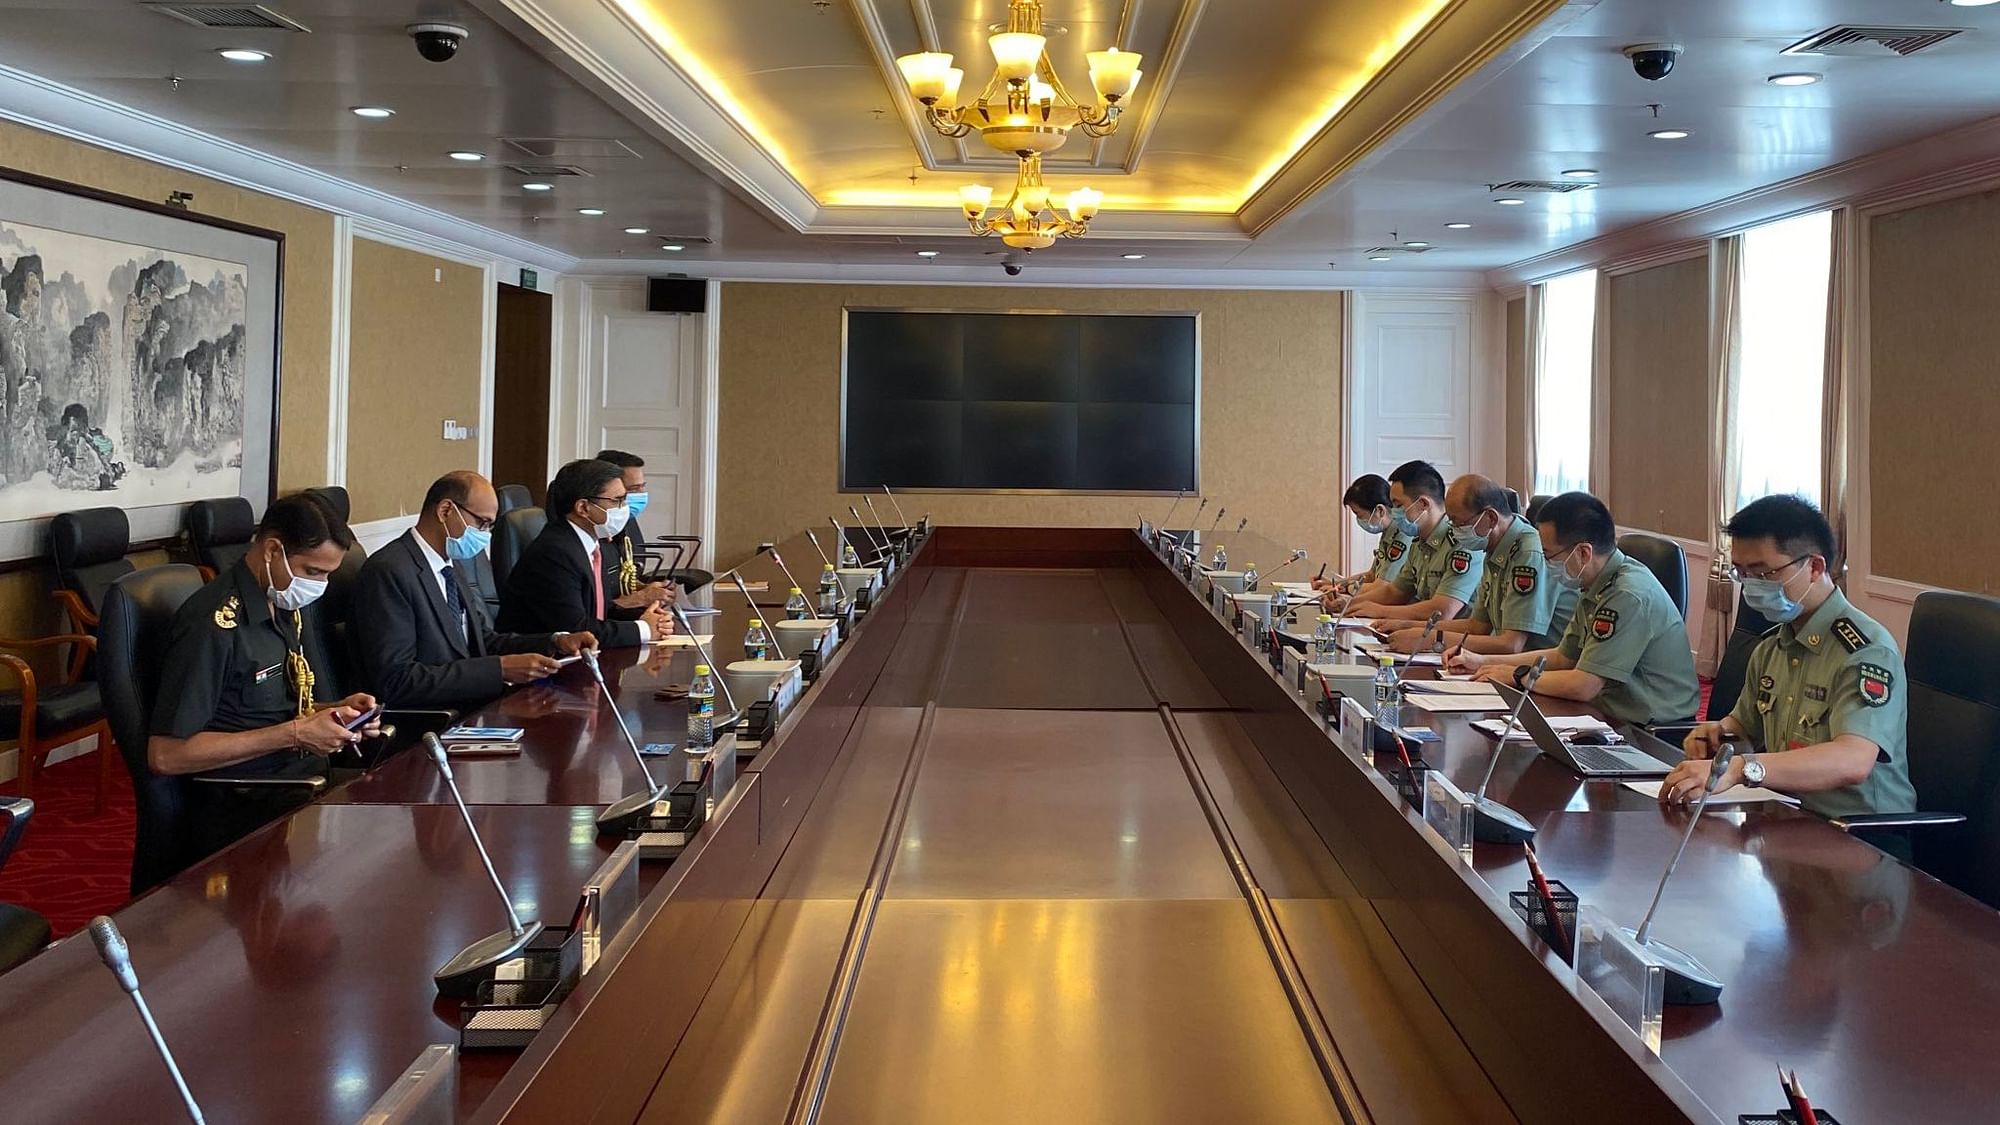 India, on Friday, 14 August, reached out to the Chinese Central Military Commission, the apex military body of China, to resolve the border crisis along the Line of Actual Control going on for over 100 days now.